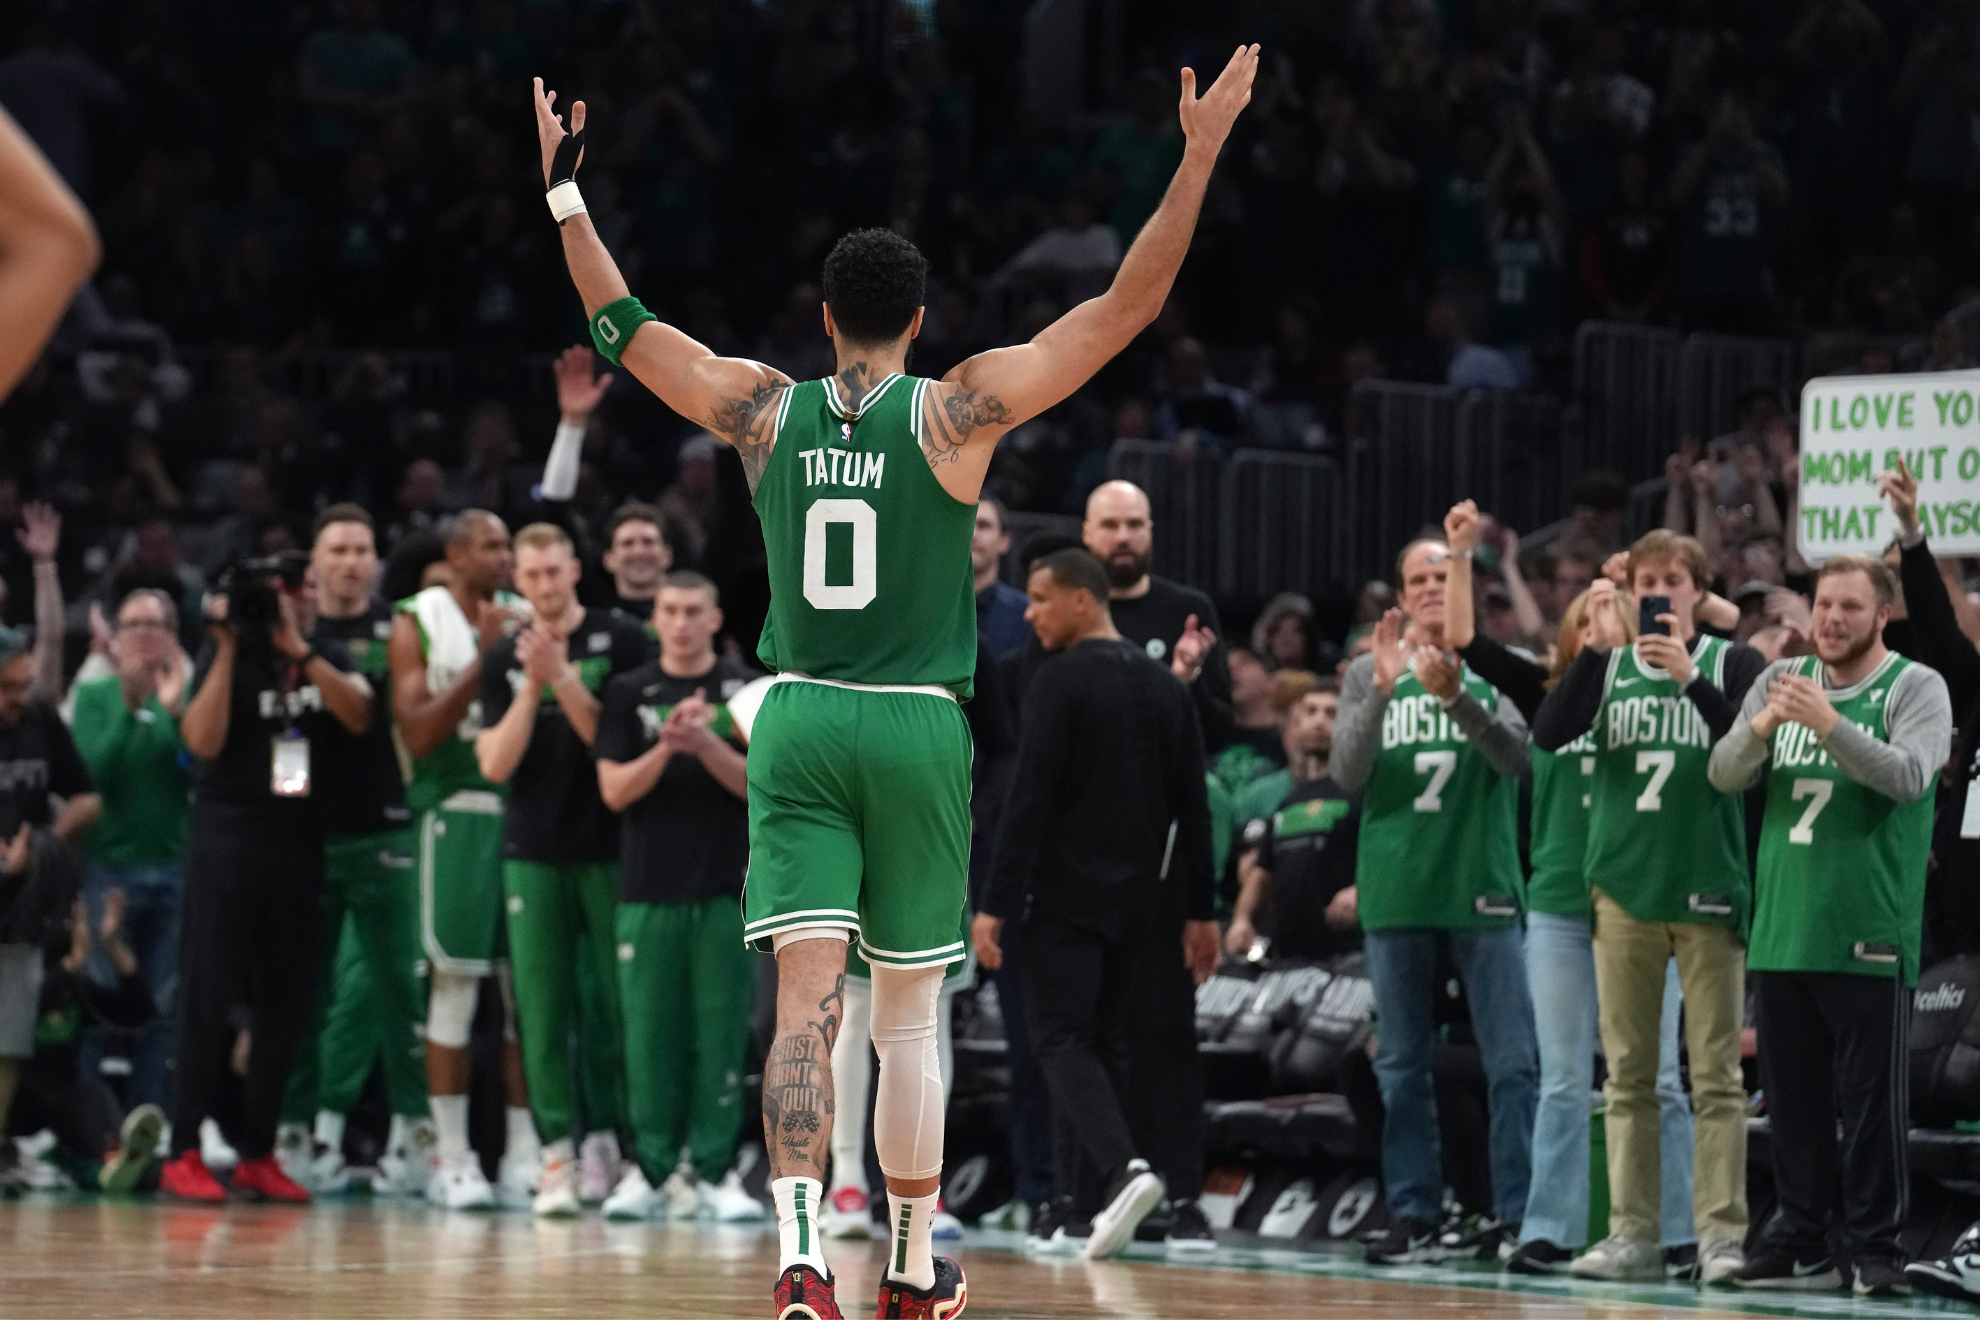 Jayson Tatum reminds Philly fans once again what they missed out